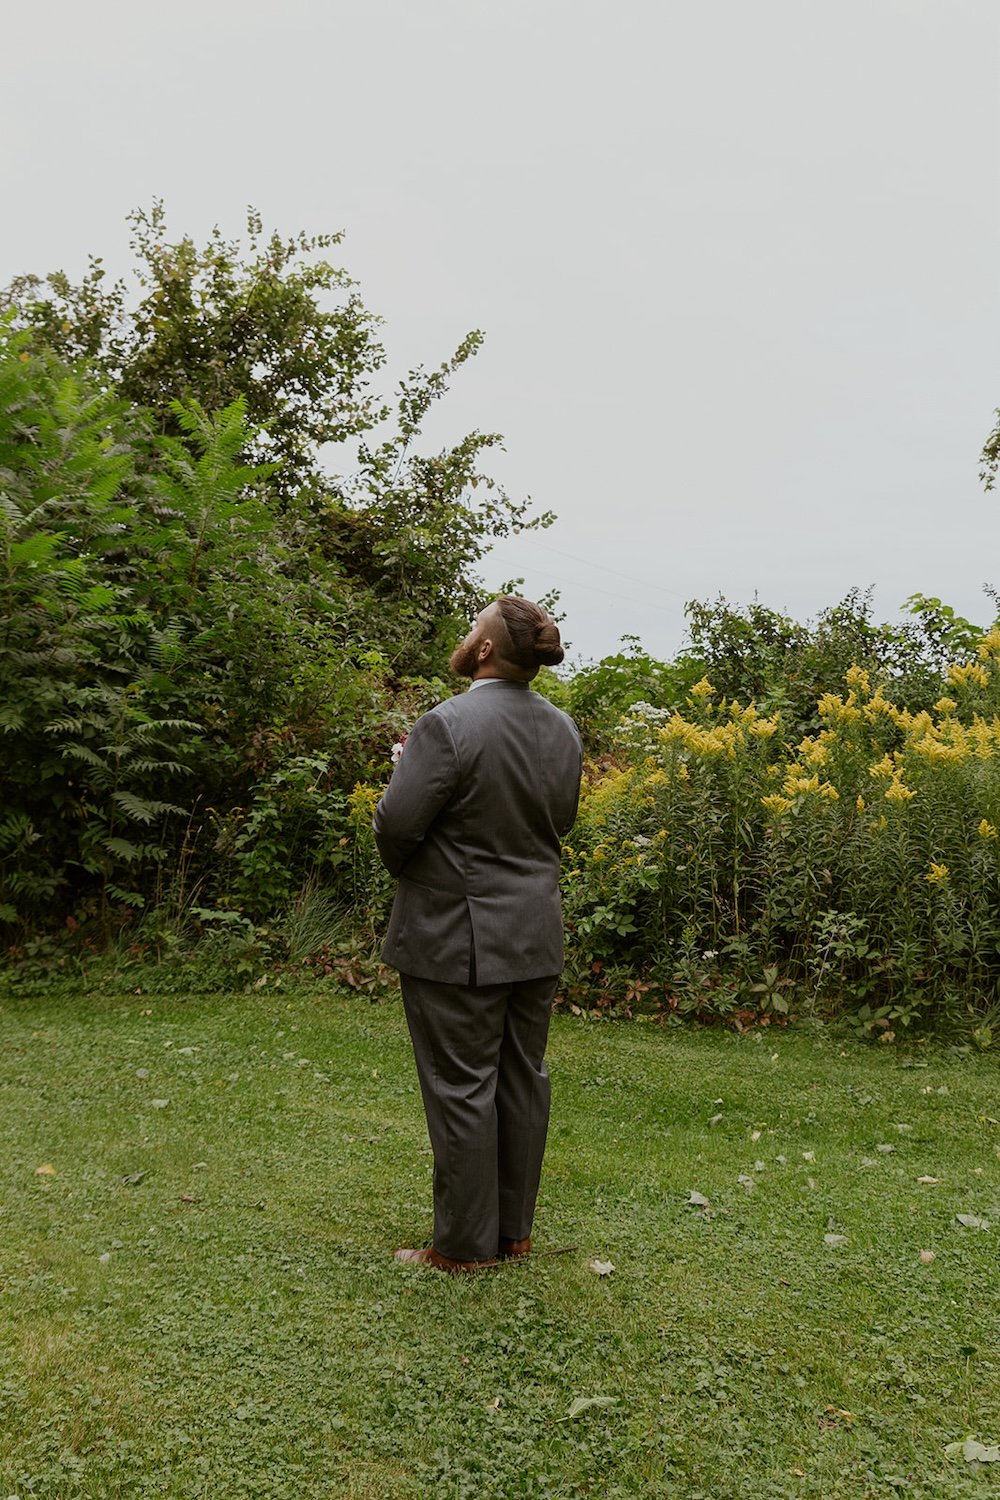 The groom standing in the yard waiting for his bride to greet him.